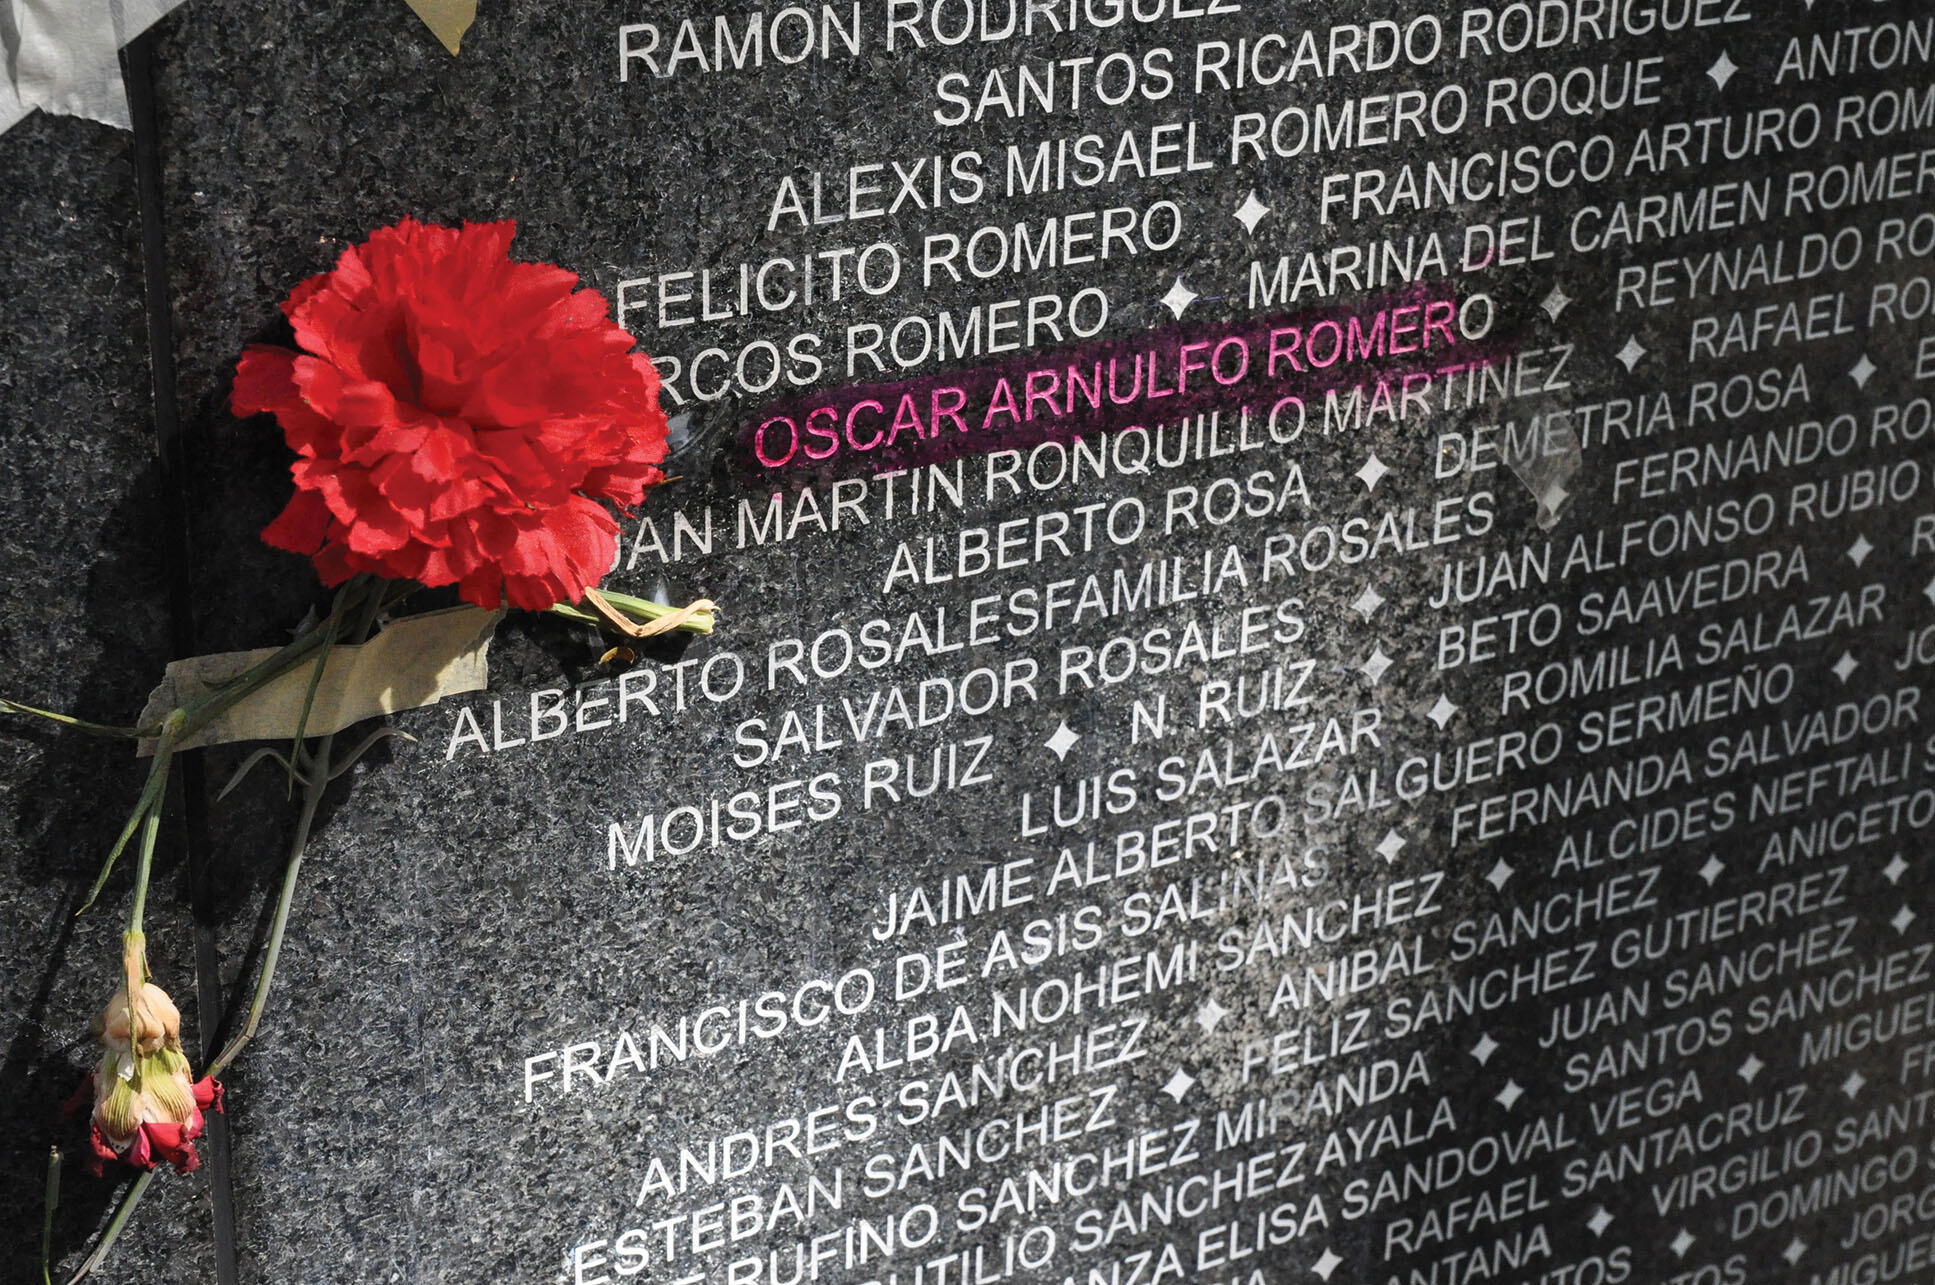 Archbishop Oscar Romero’s name highlighted on a black wall memorial listing the names of victims of violence in El Salvador. (Photo courtesy of the Archbishop Romero Trust.)